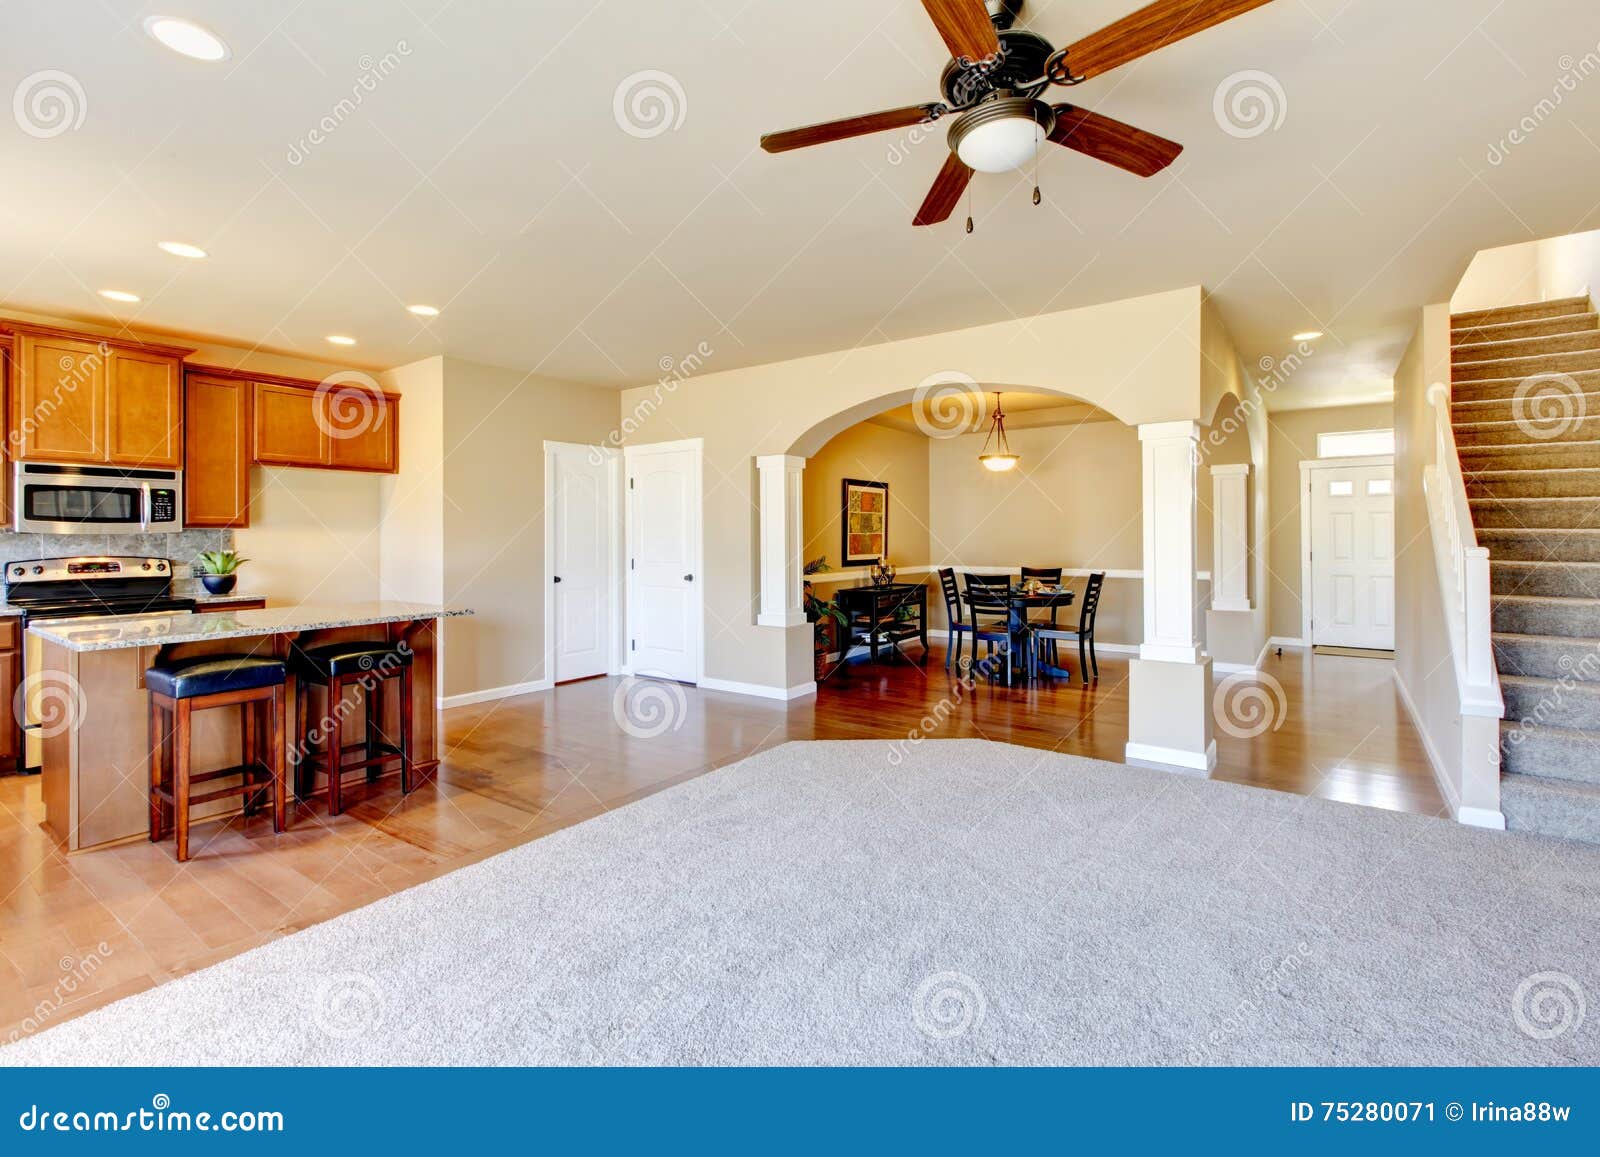 Open Floor Plan View Of Kitchen Dining Room And Entryway Stock